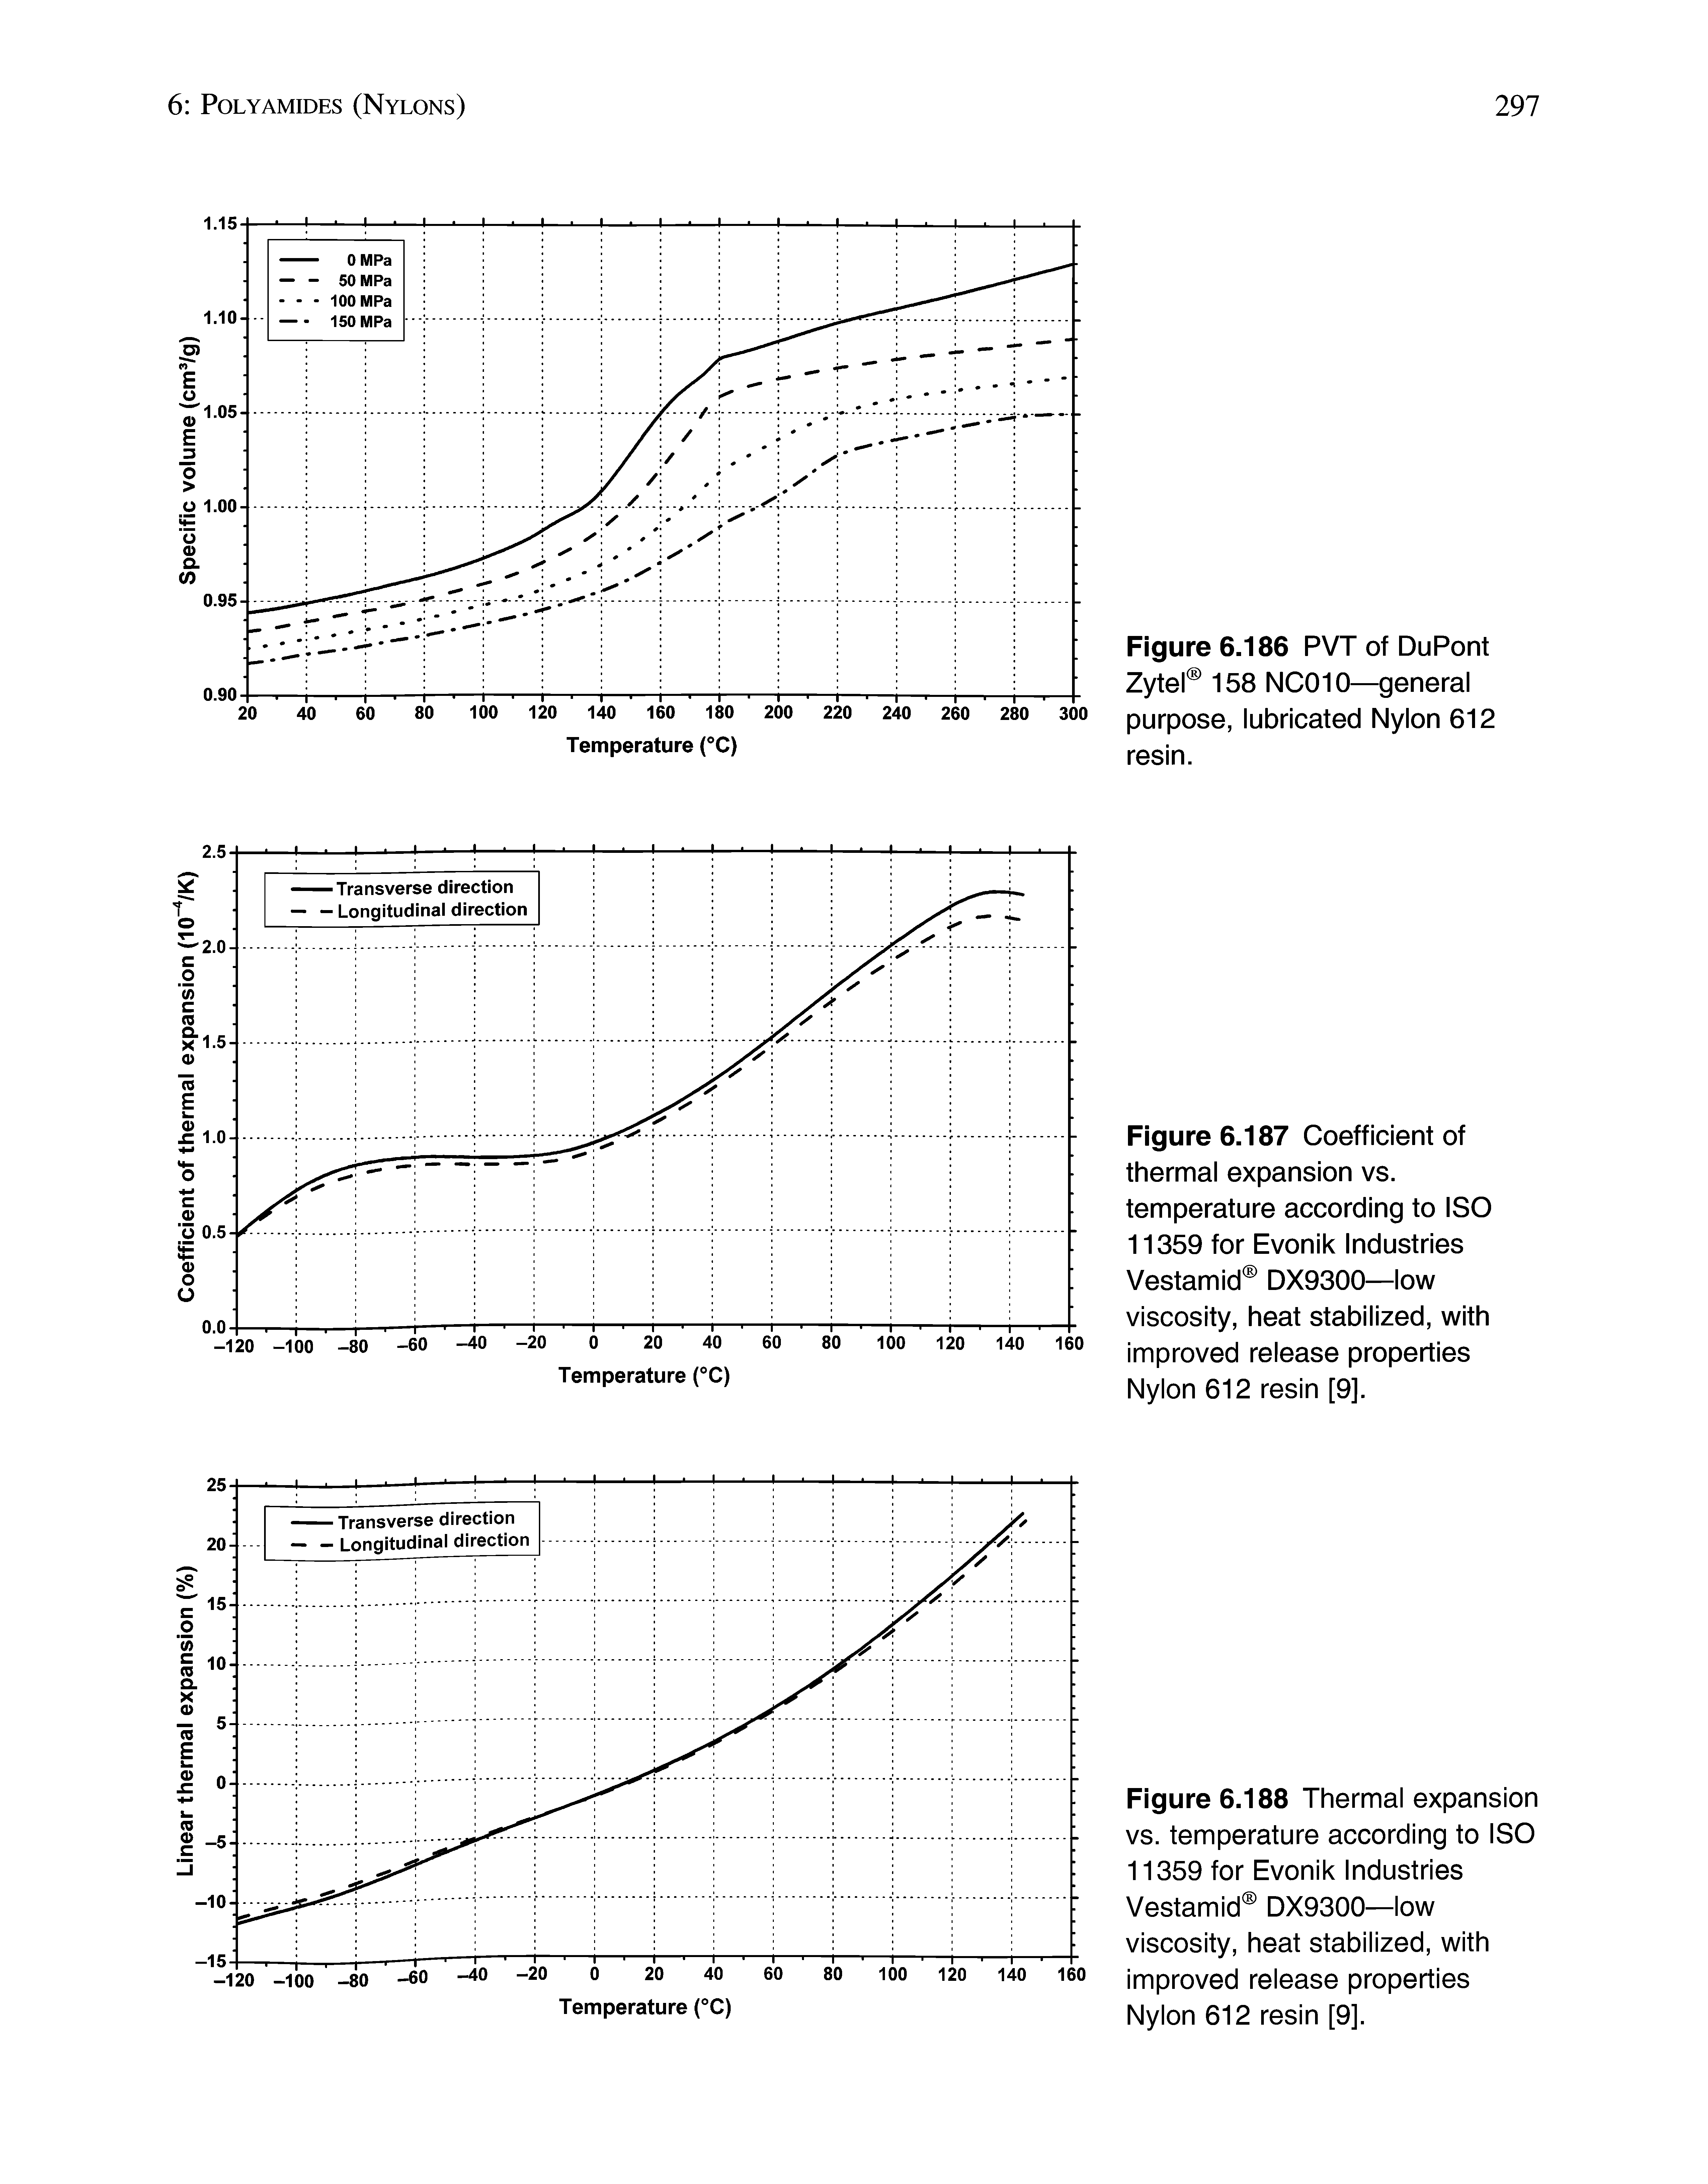 Figure 6.187 Coefficient of thermal expansion vs. temperature according to ISO 11359 for Evonik Industries Vestamid DX9300—low viscosity, heat stabilized, with improved release properties Nylon 612 resin [9].